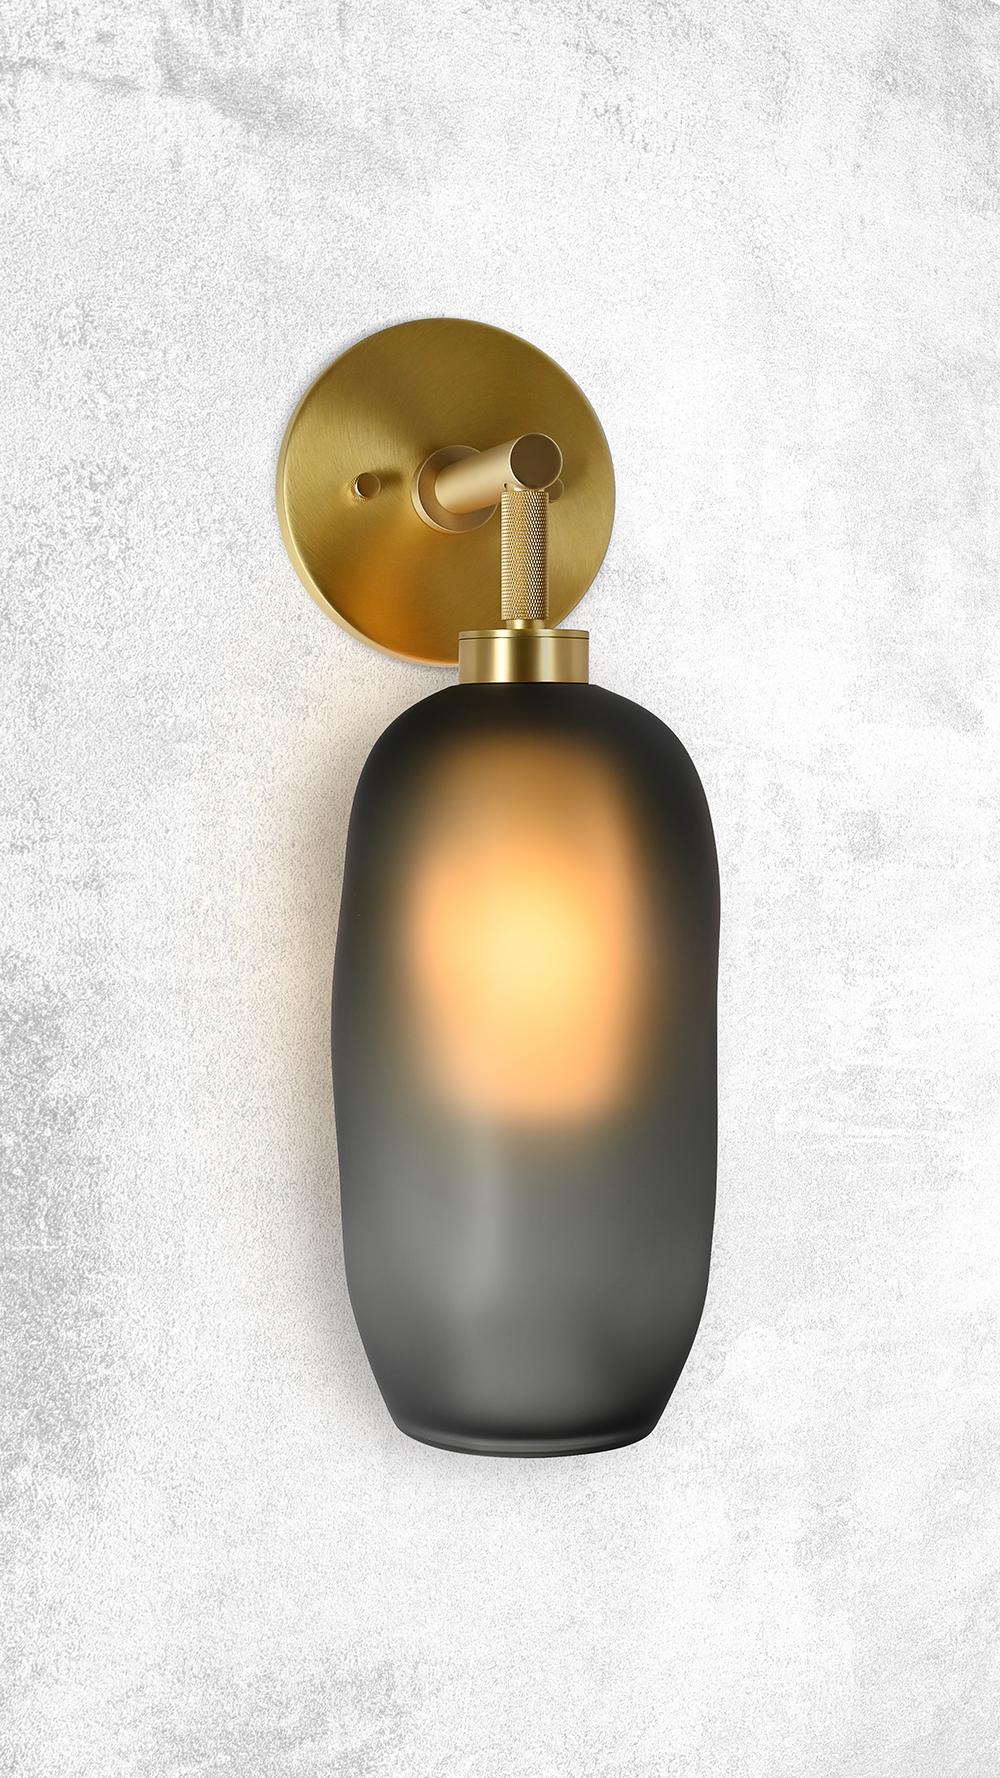 The Catherine can be displayed as a hanging pendant, wall sconce, or grouped in multiples. Our most versatile design also has a new, elevated look: a tubular oval glass diffuser that perfects the art of the soft glow. Balanced by the masculine edge